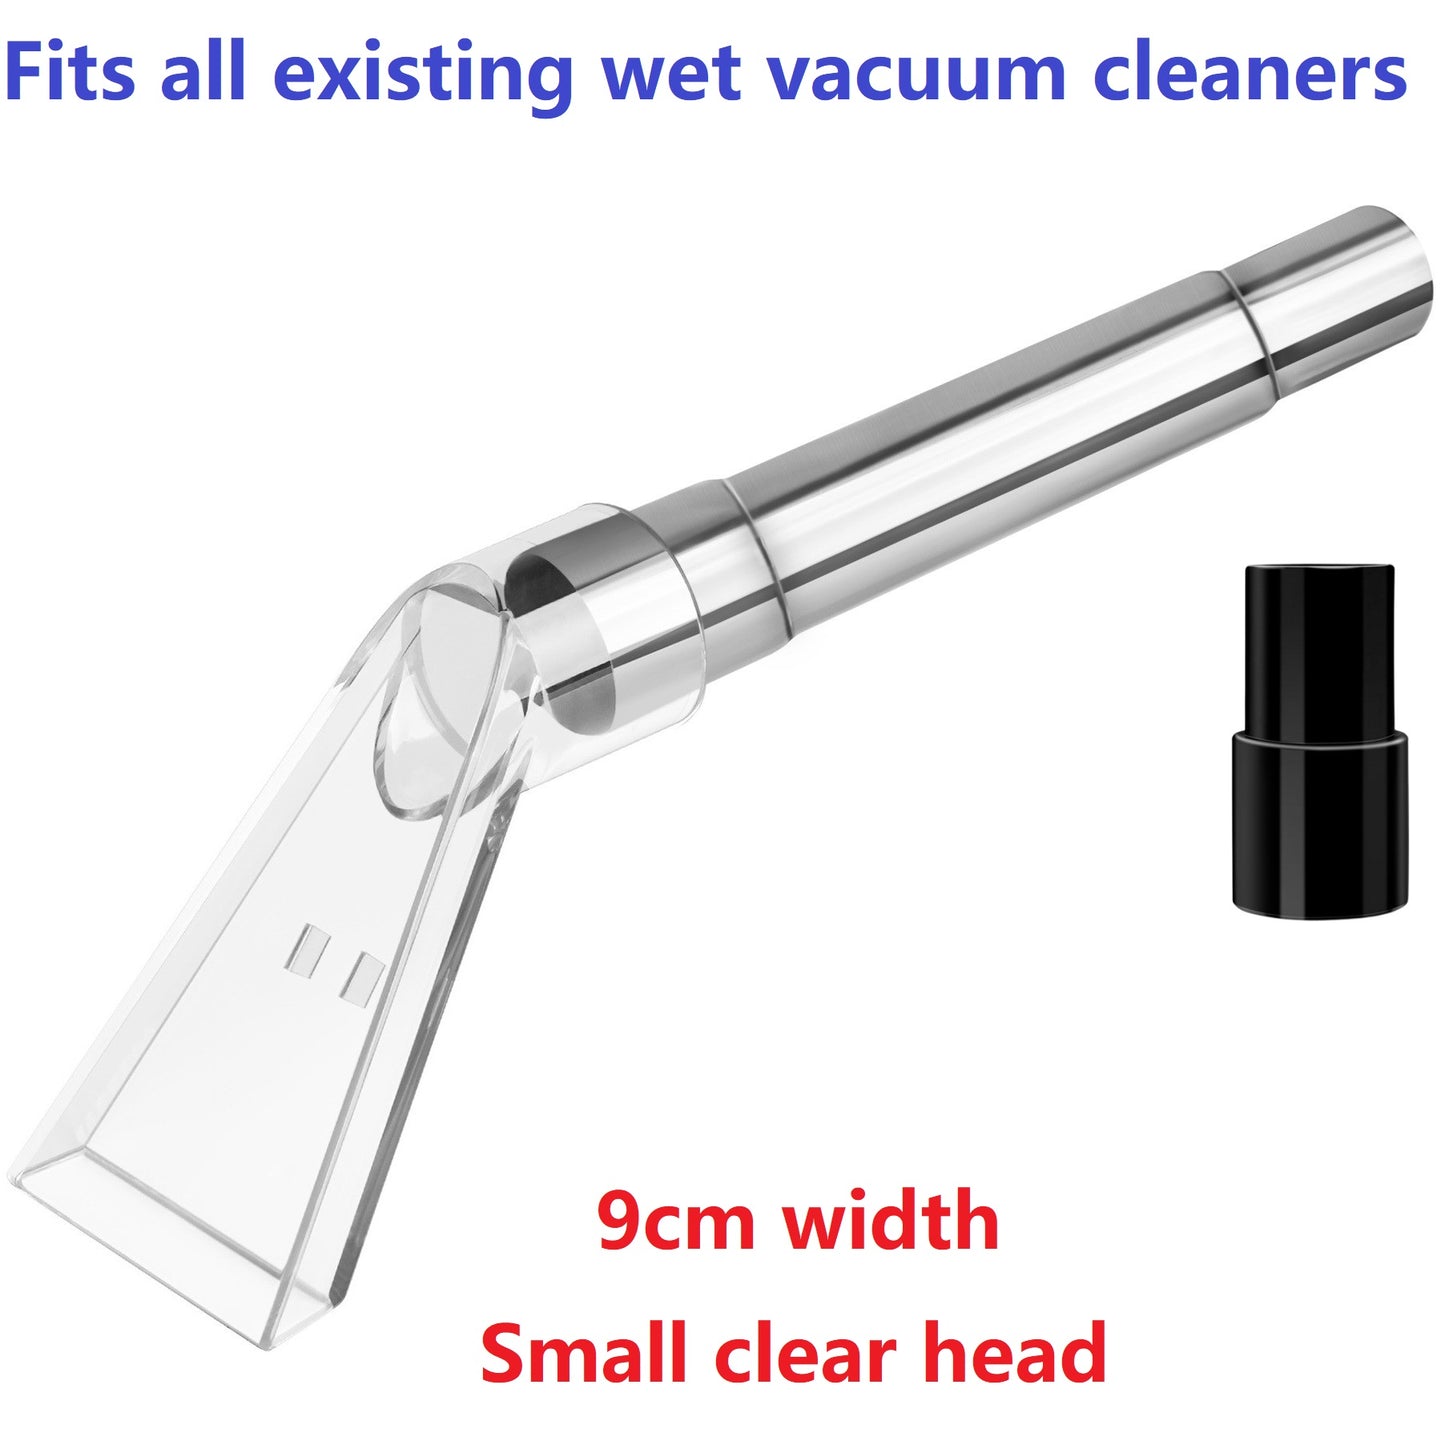 For European Market Fits All Wet Vacuums 9cm Width Cleaners Extraction –  HAPPY TREE CLEAN